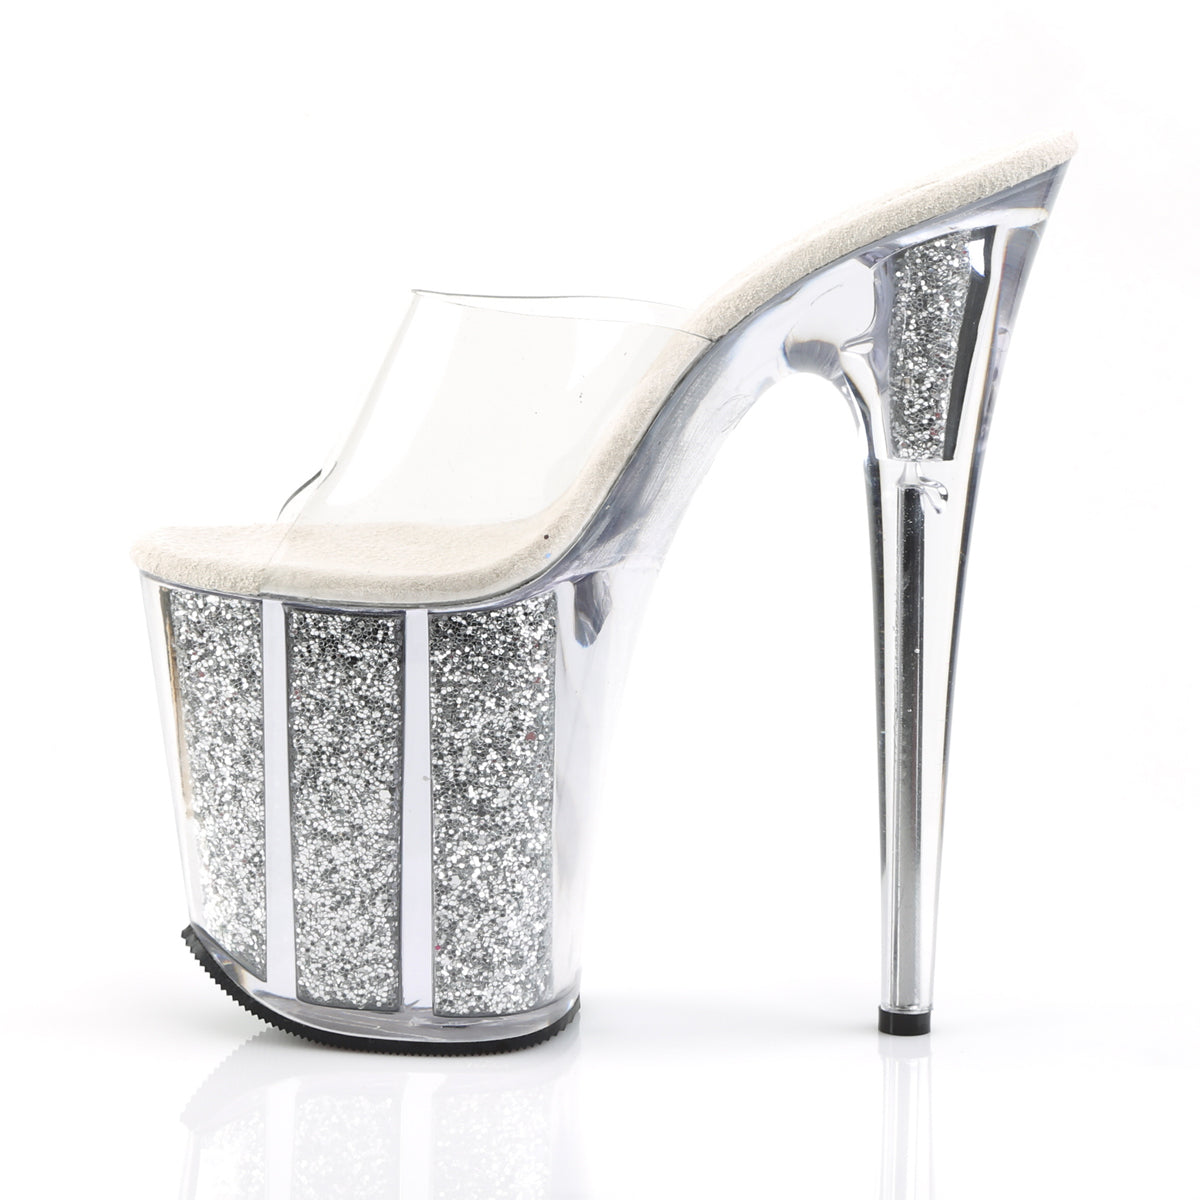 FLAMINGO-801G 8" Heel Clear Silver Glitter Strippers Shoes-Pleaser- Sexy Shoes Pole Dance Heels